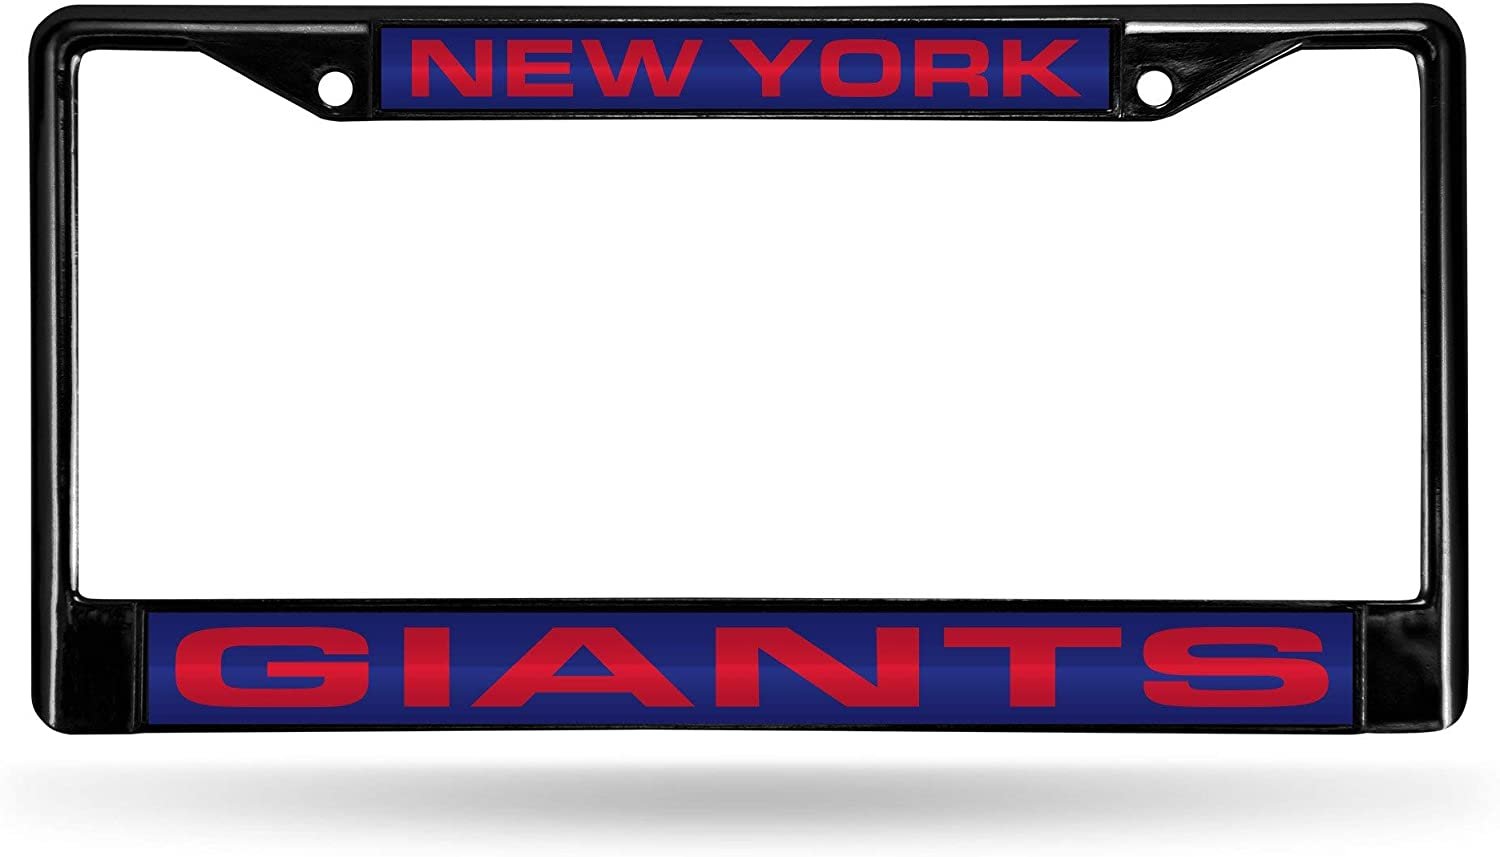 New York Giants Black Metal License Plate Frame Tag Cover, Laser Acrylic Mirrored Inserts, 12x6 Inch